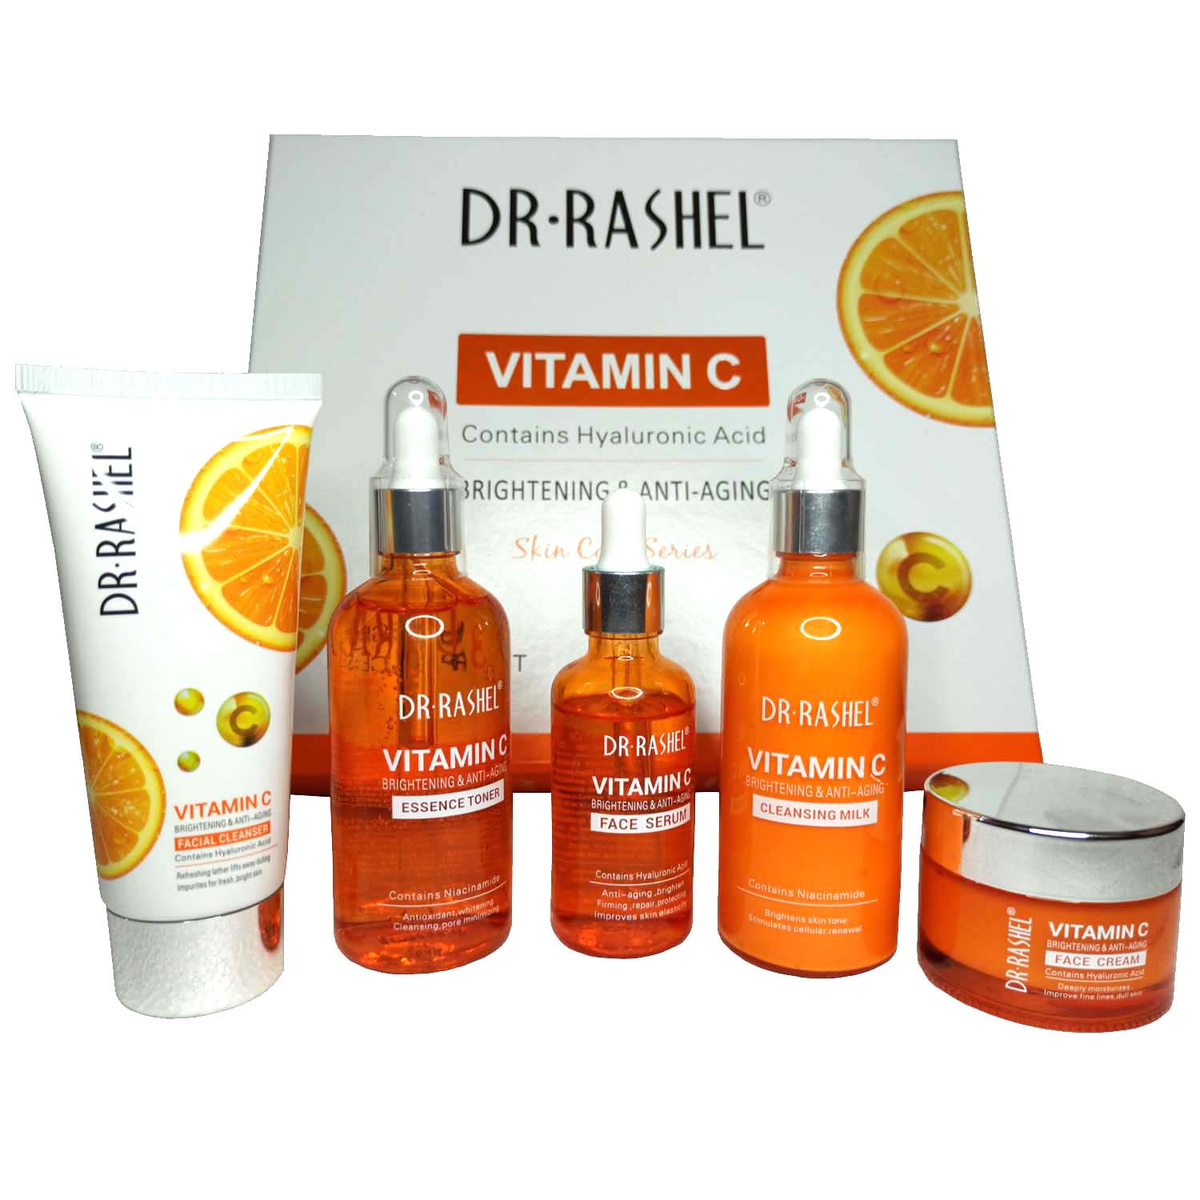 Dr Rashel Products Review